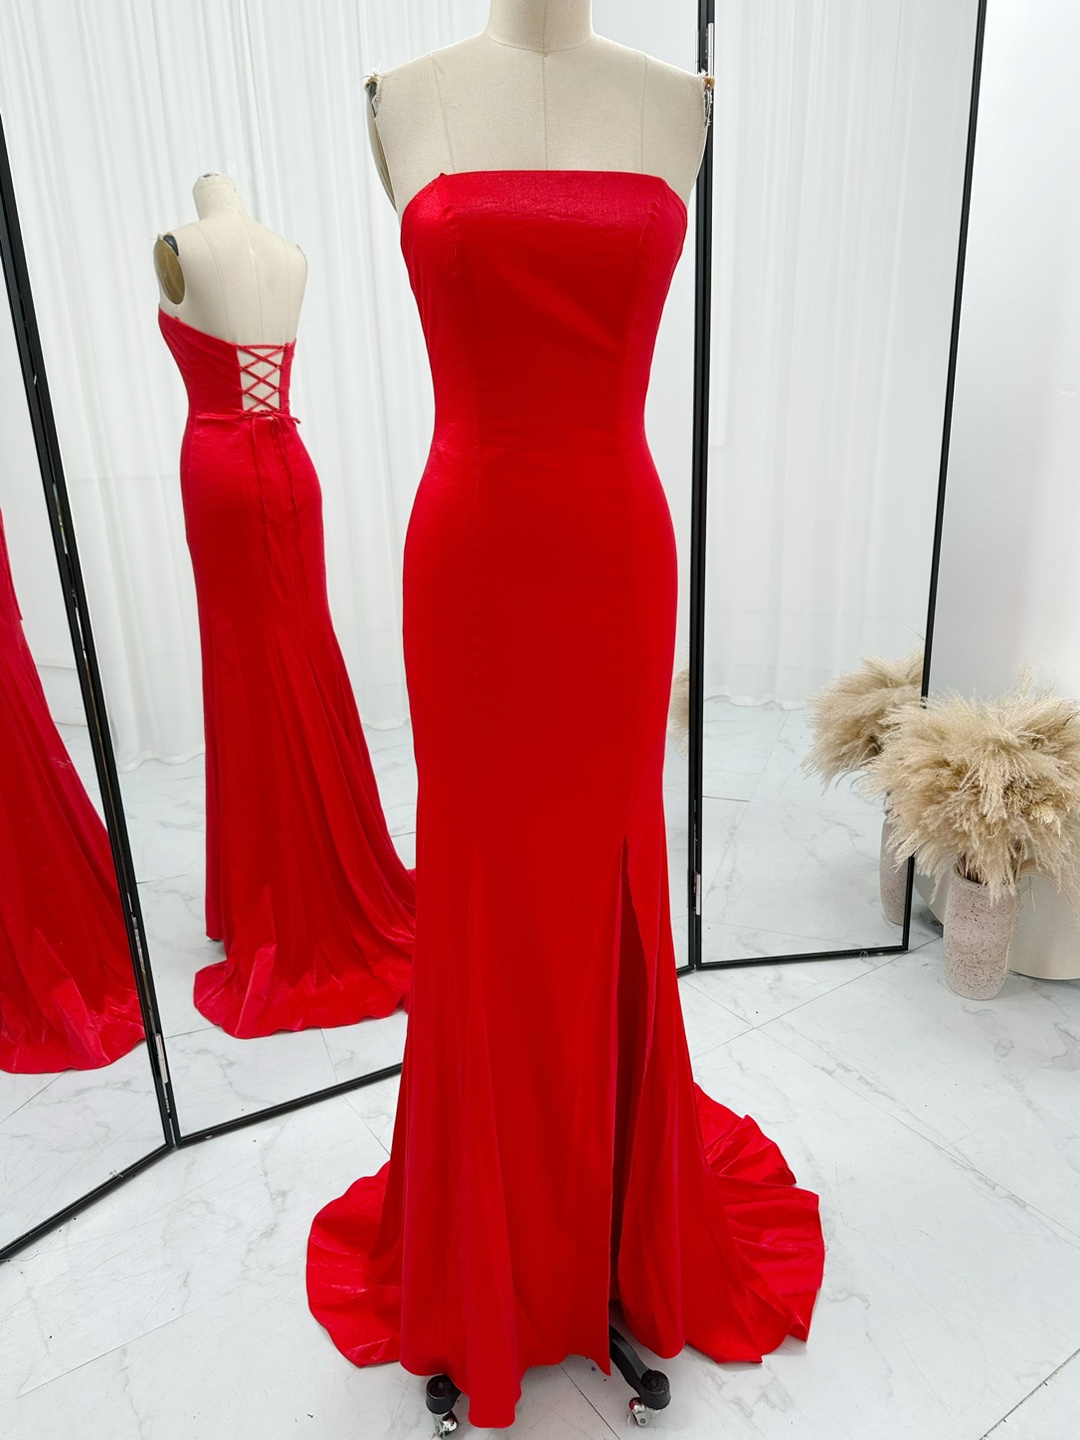 Strapless Red Prom Dress With Slit